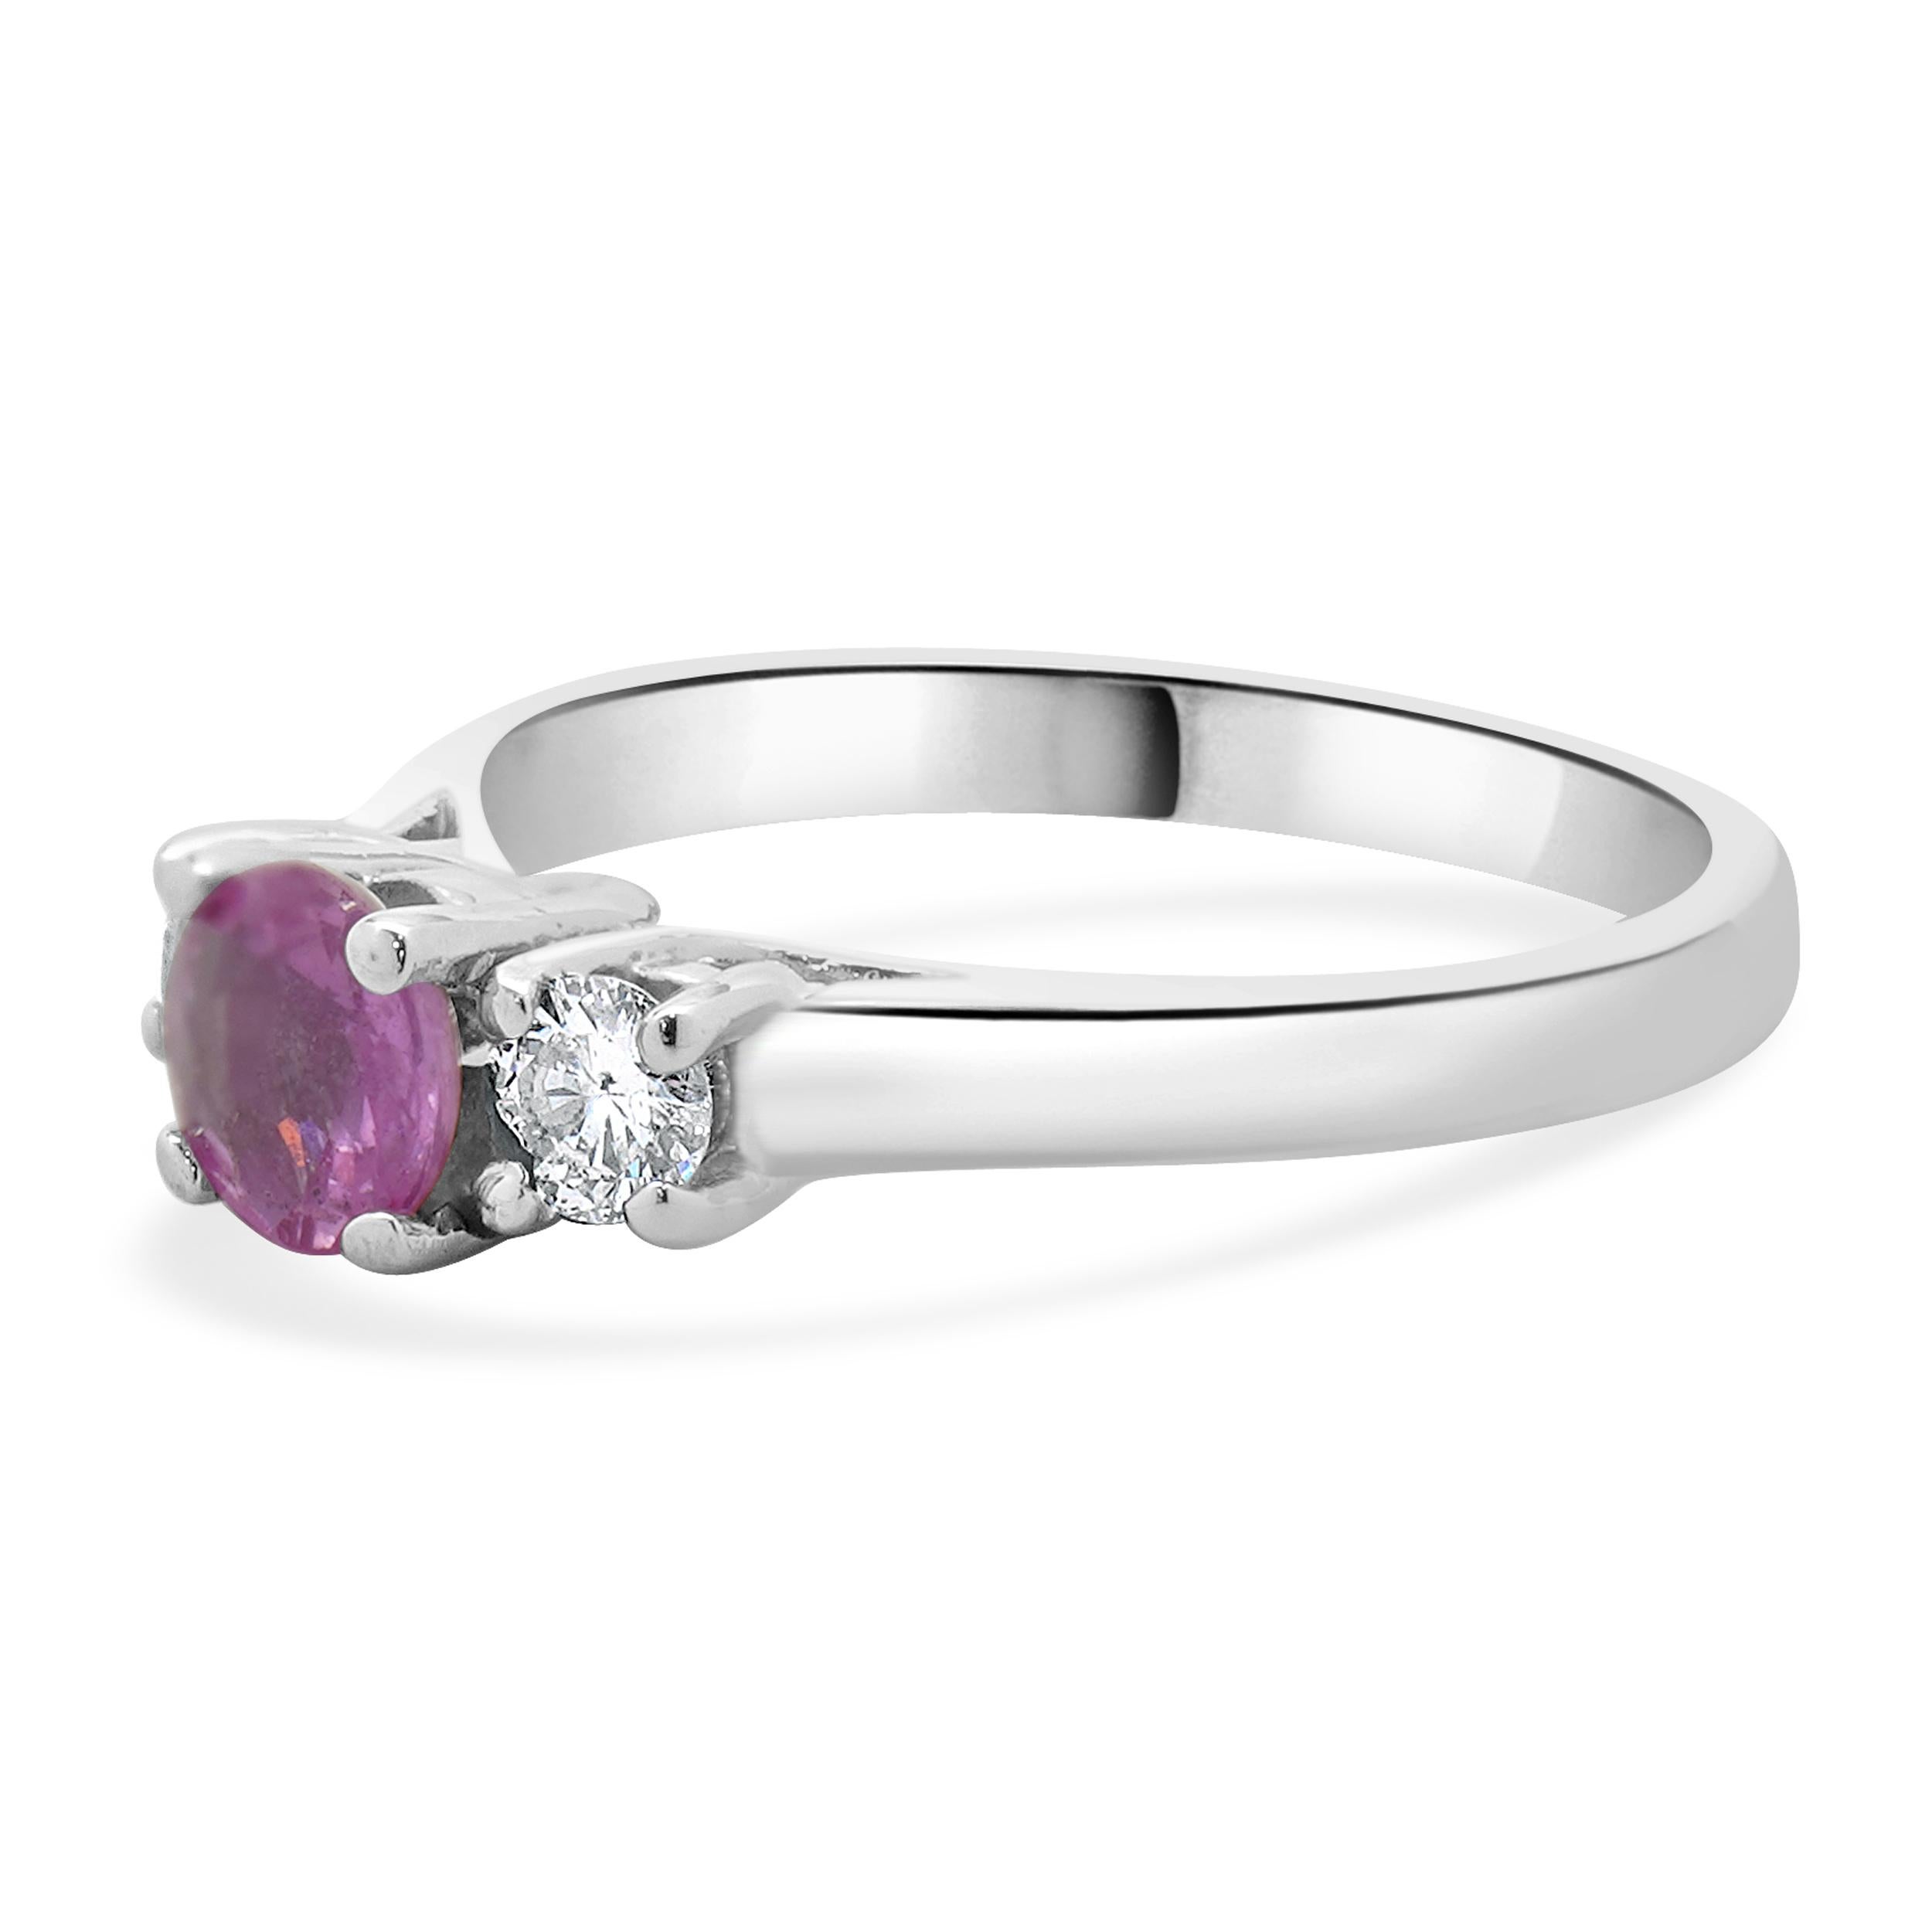 Material: 14K white gold
Diamond: 2 round brilliant cut = 0.26cttw
Color: H
Clarity: SI2
Pink Sapphire: 1 round cut = 0.50ct
Ring Size: 6.25 (please allow up to 2 additional business days for sizing requests)
Dimensions: ring top measures